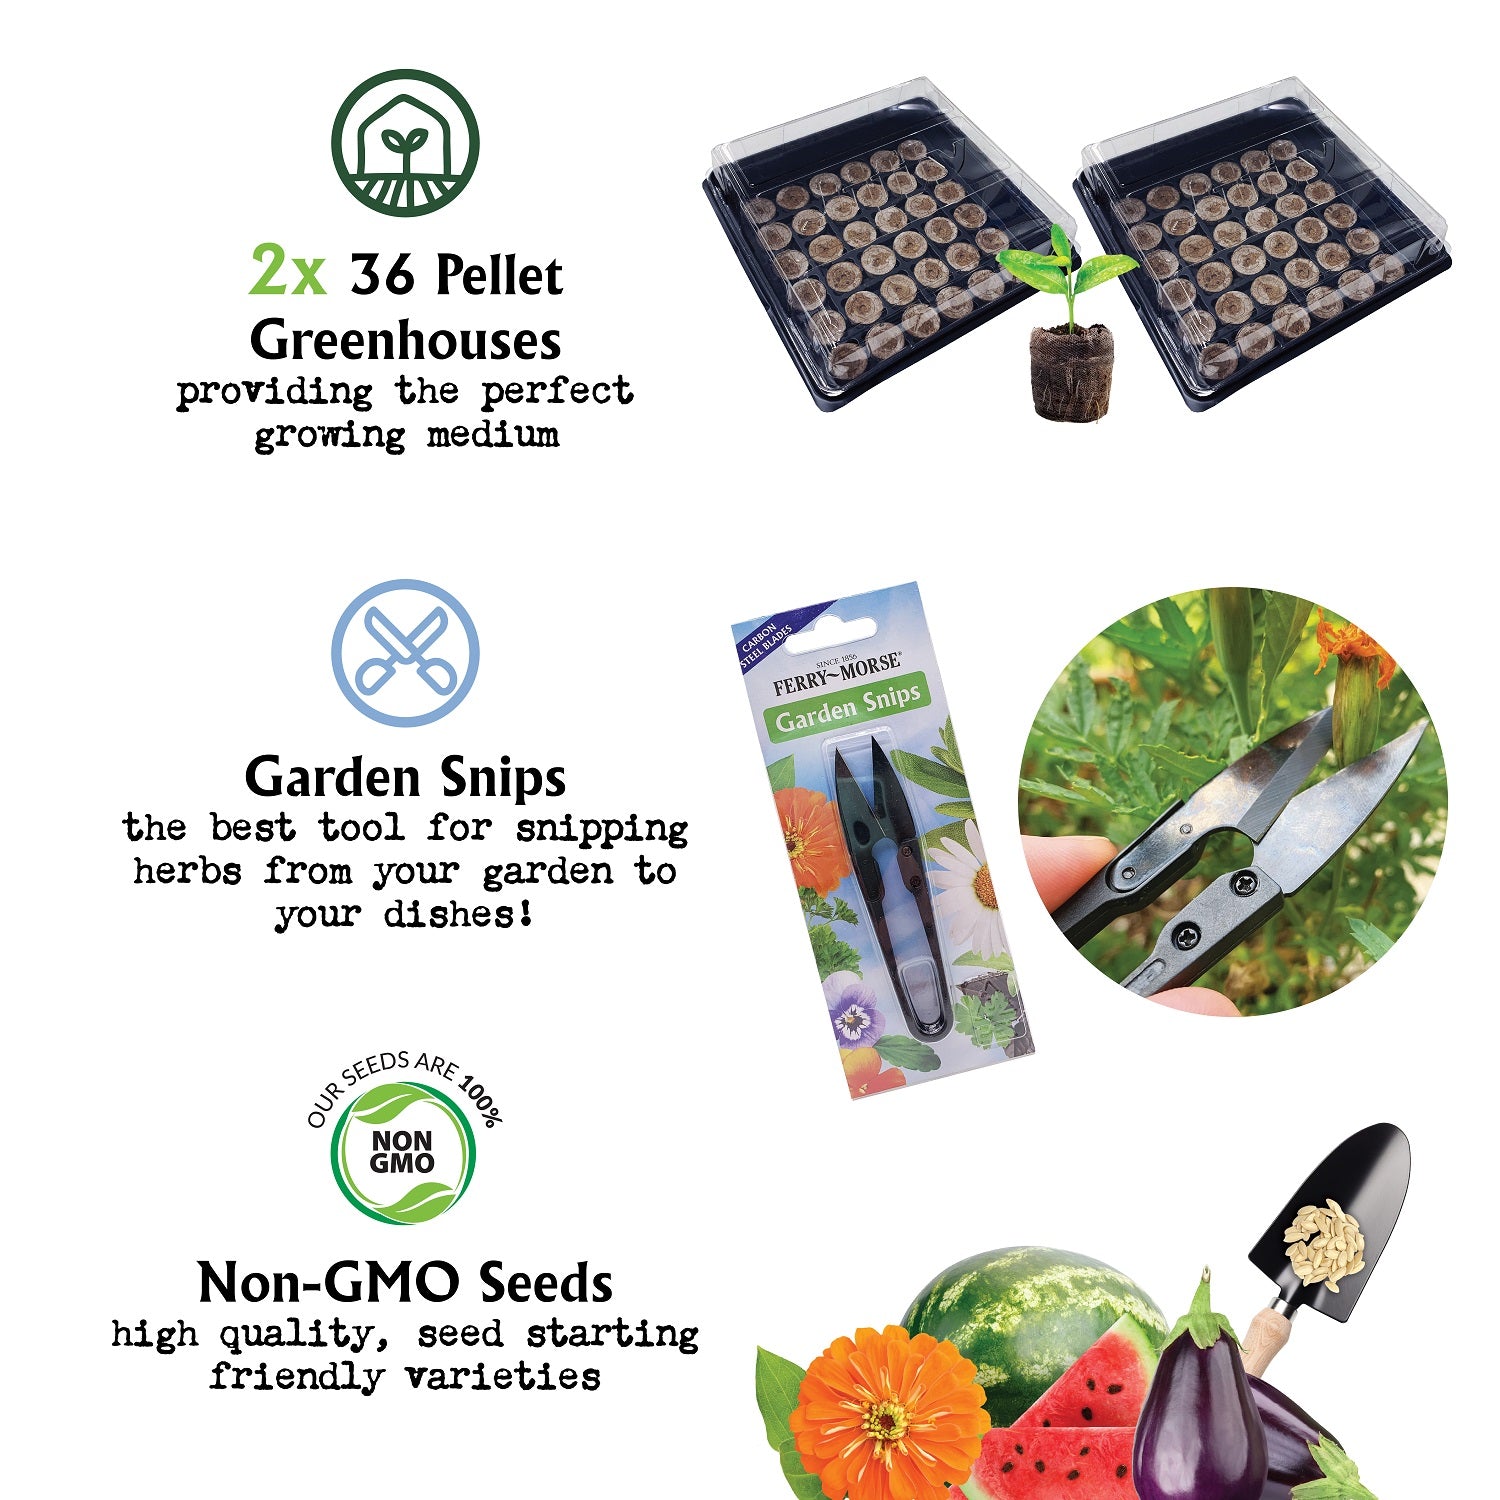 This Aromatherapy Herb Garden Kit provides Non-GMO high quality seeds, the perfect growing medium, the best tool for snipping herbs from your garden to your dishes!